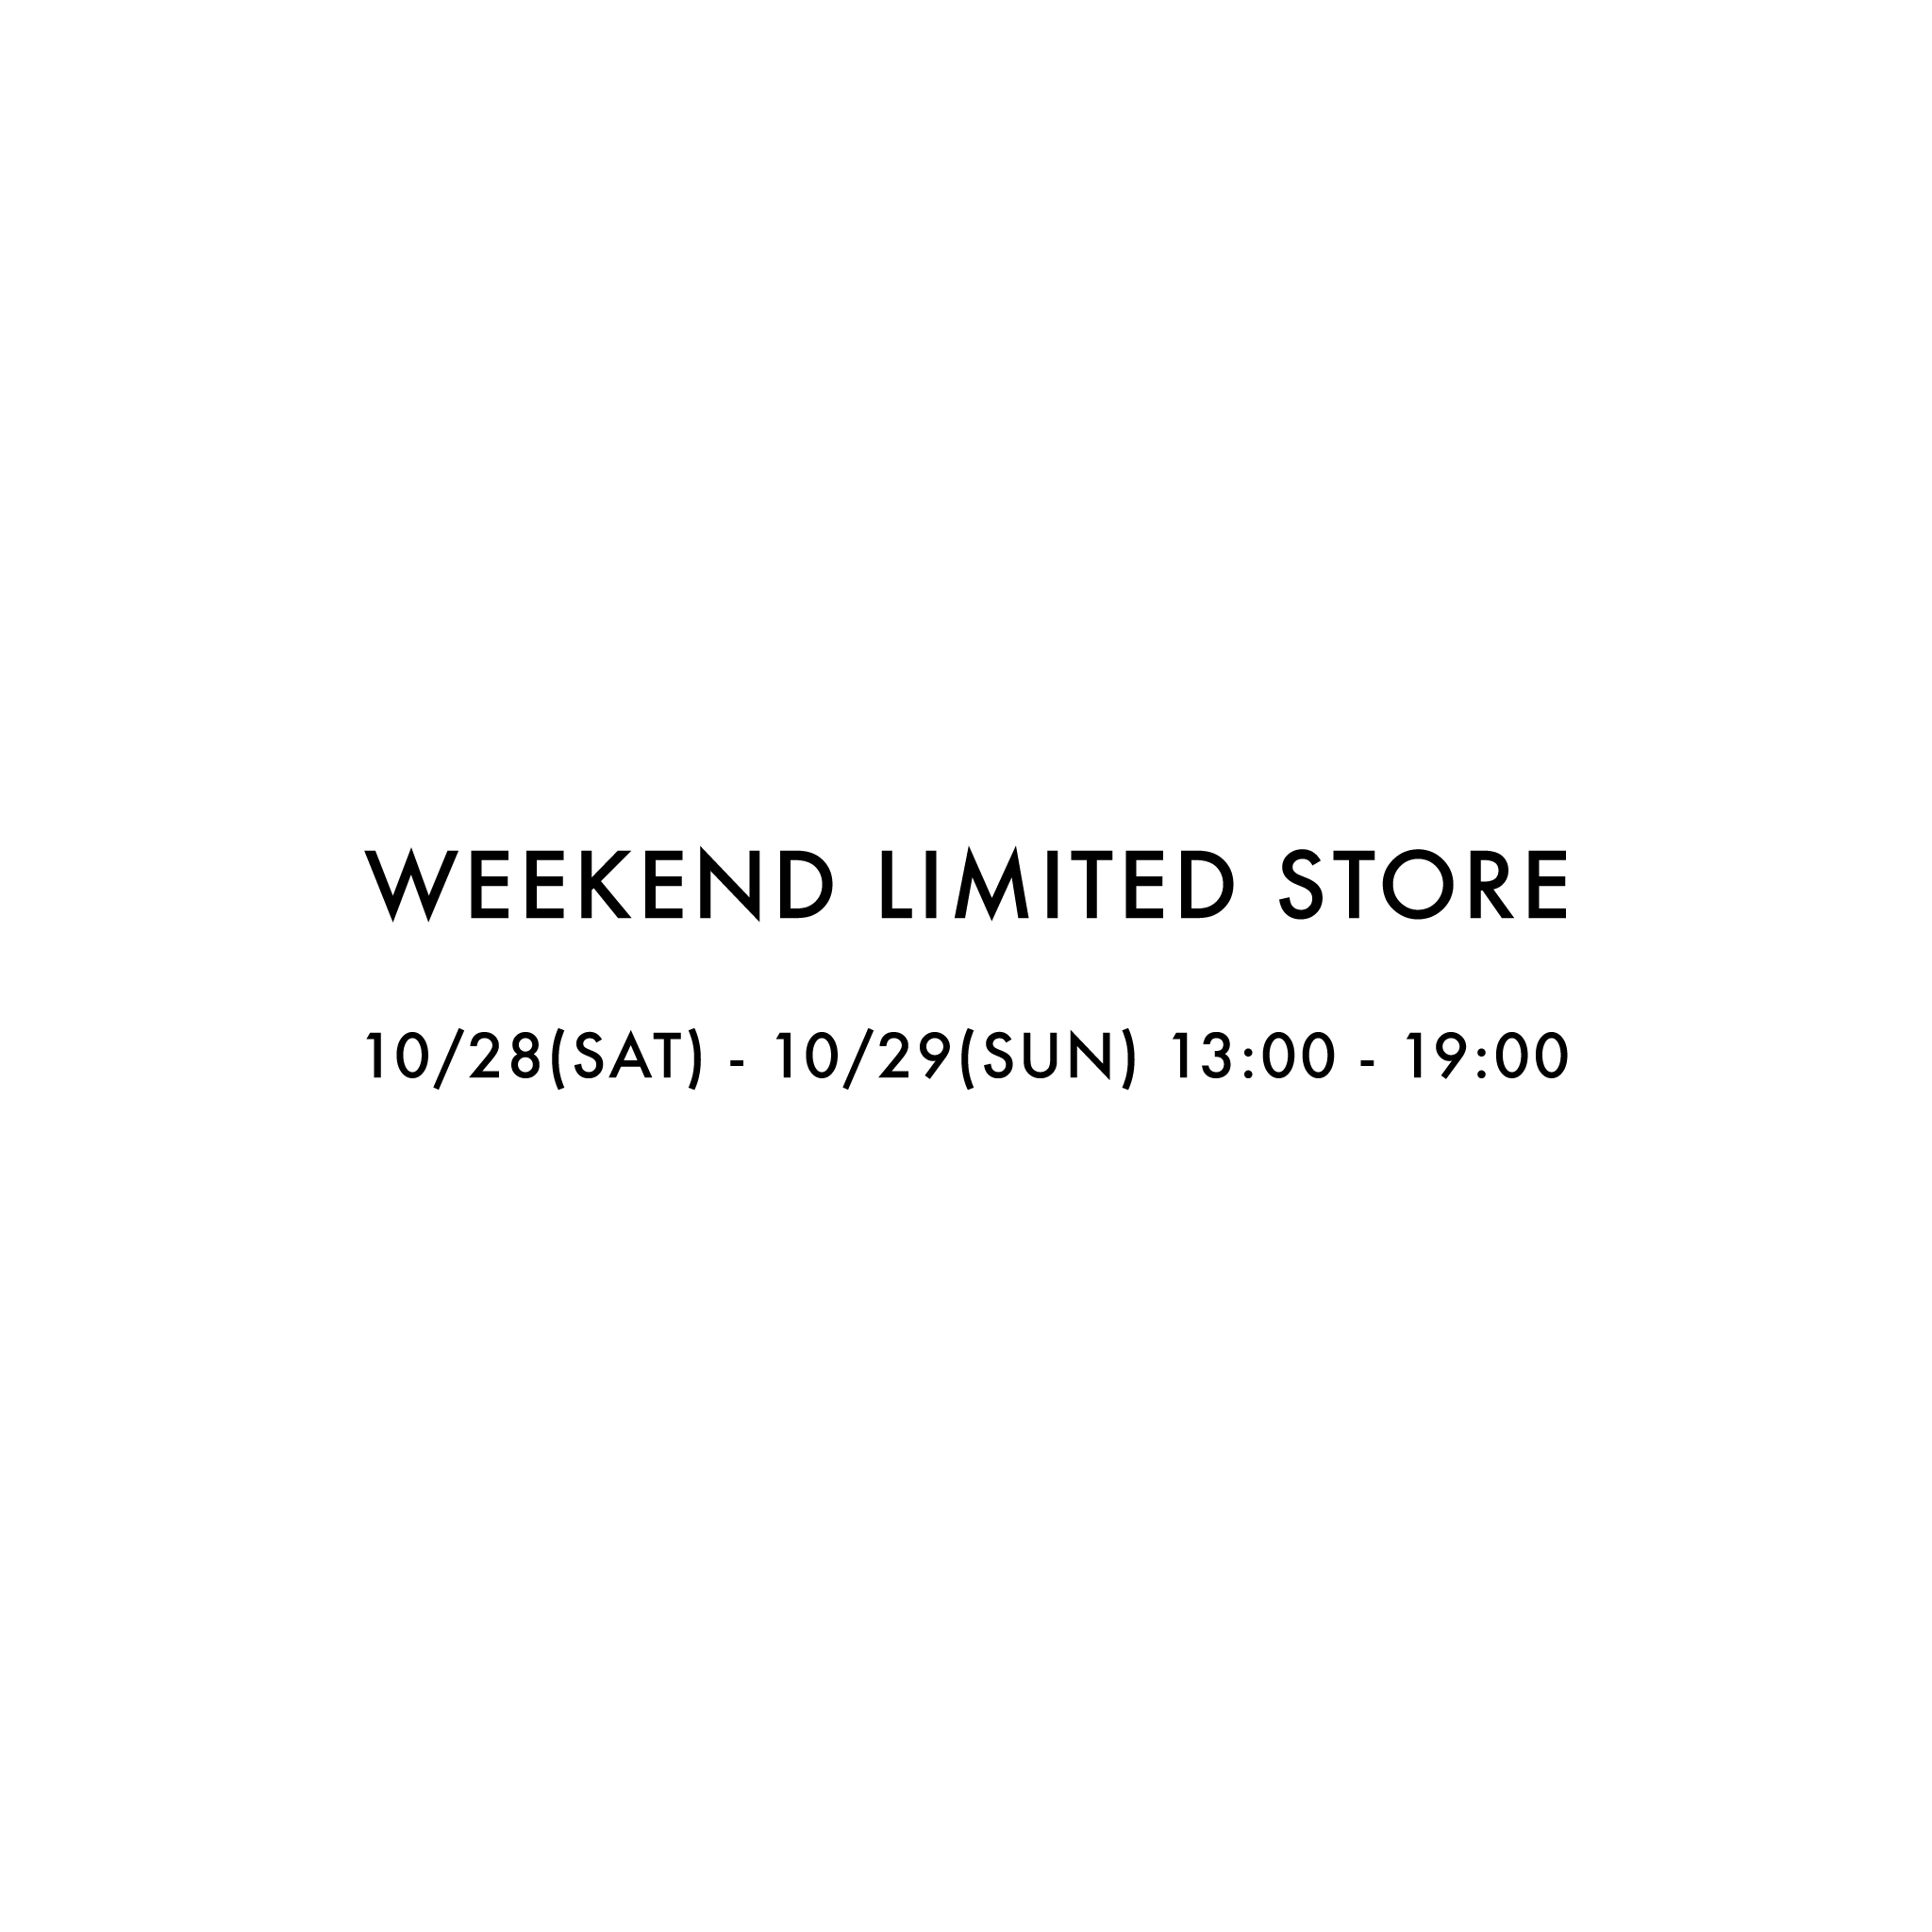 WEEKEND LIMITED STORE